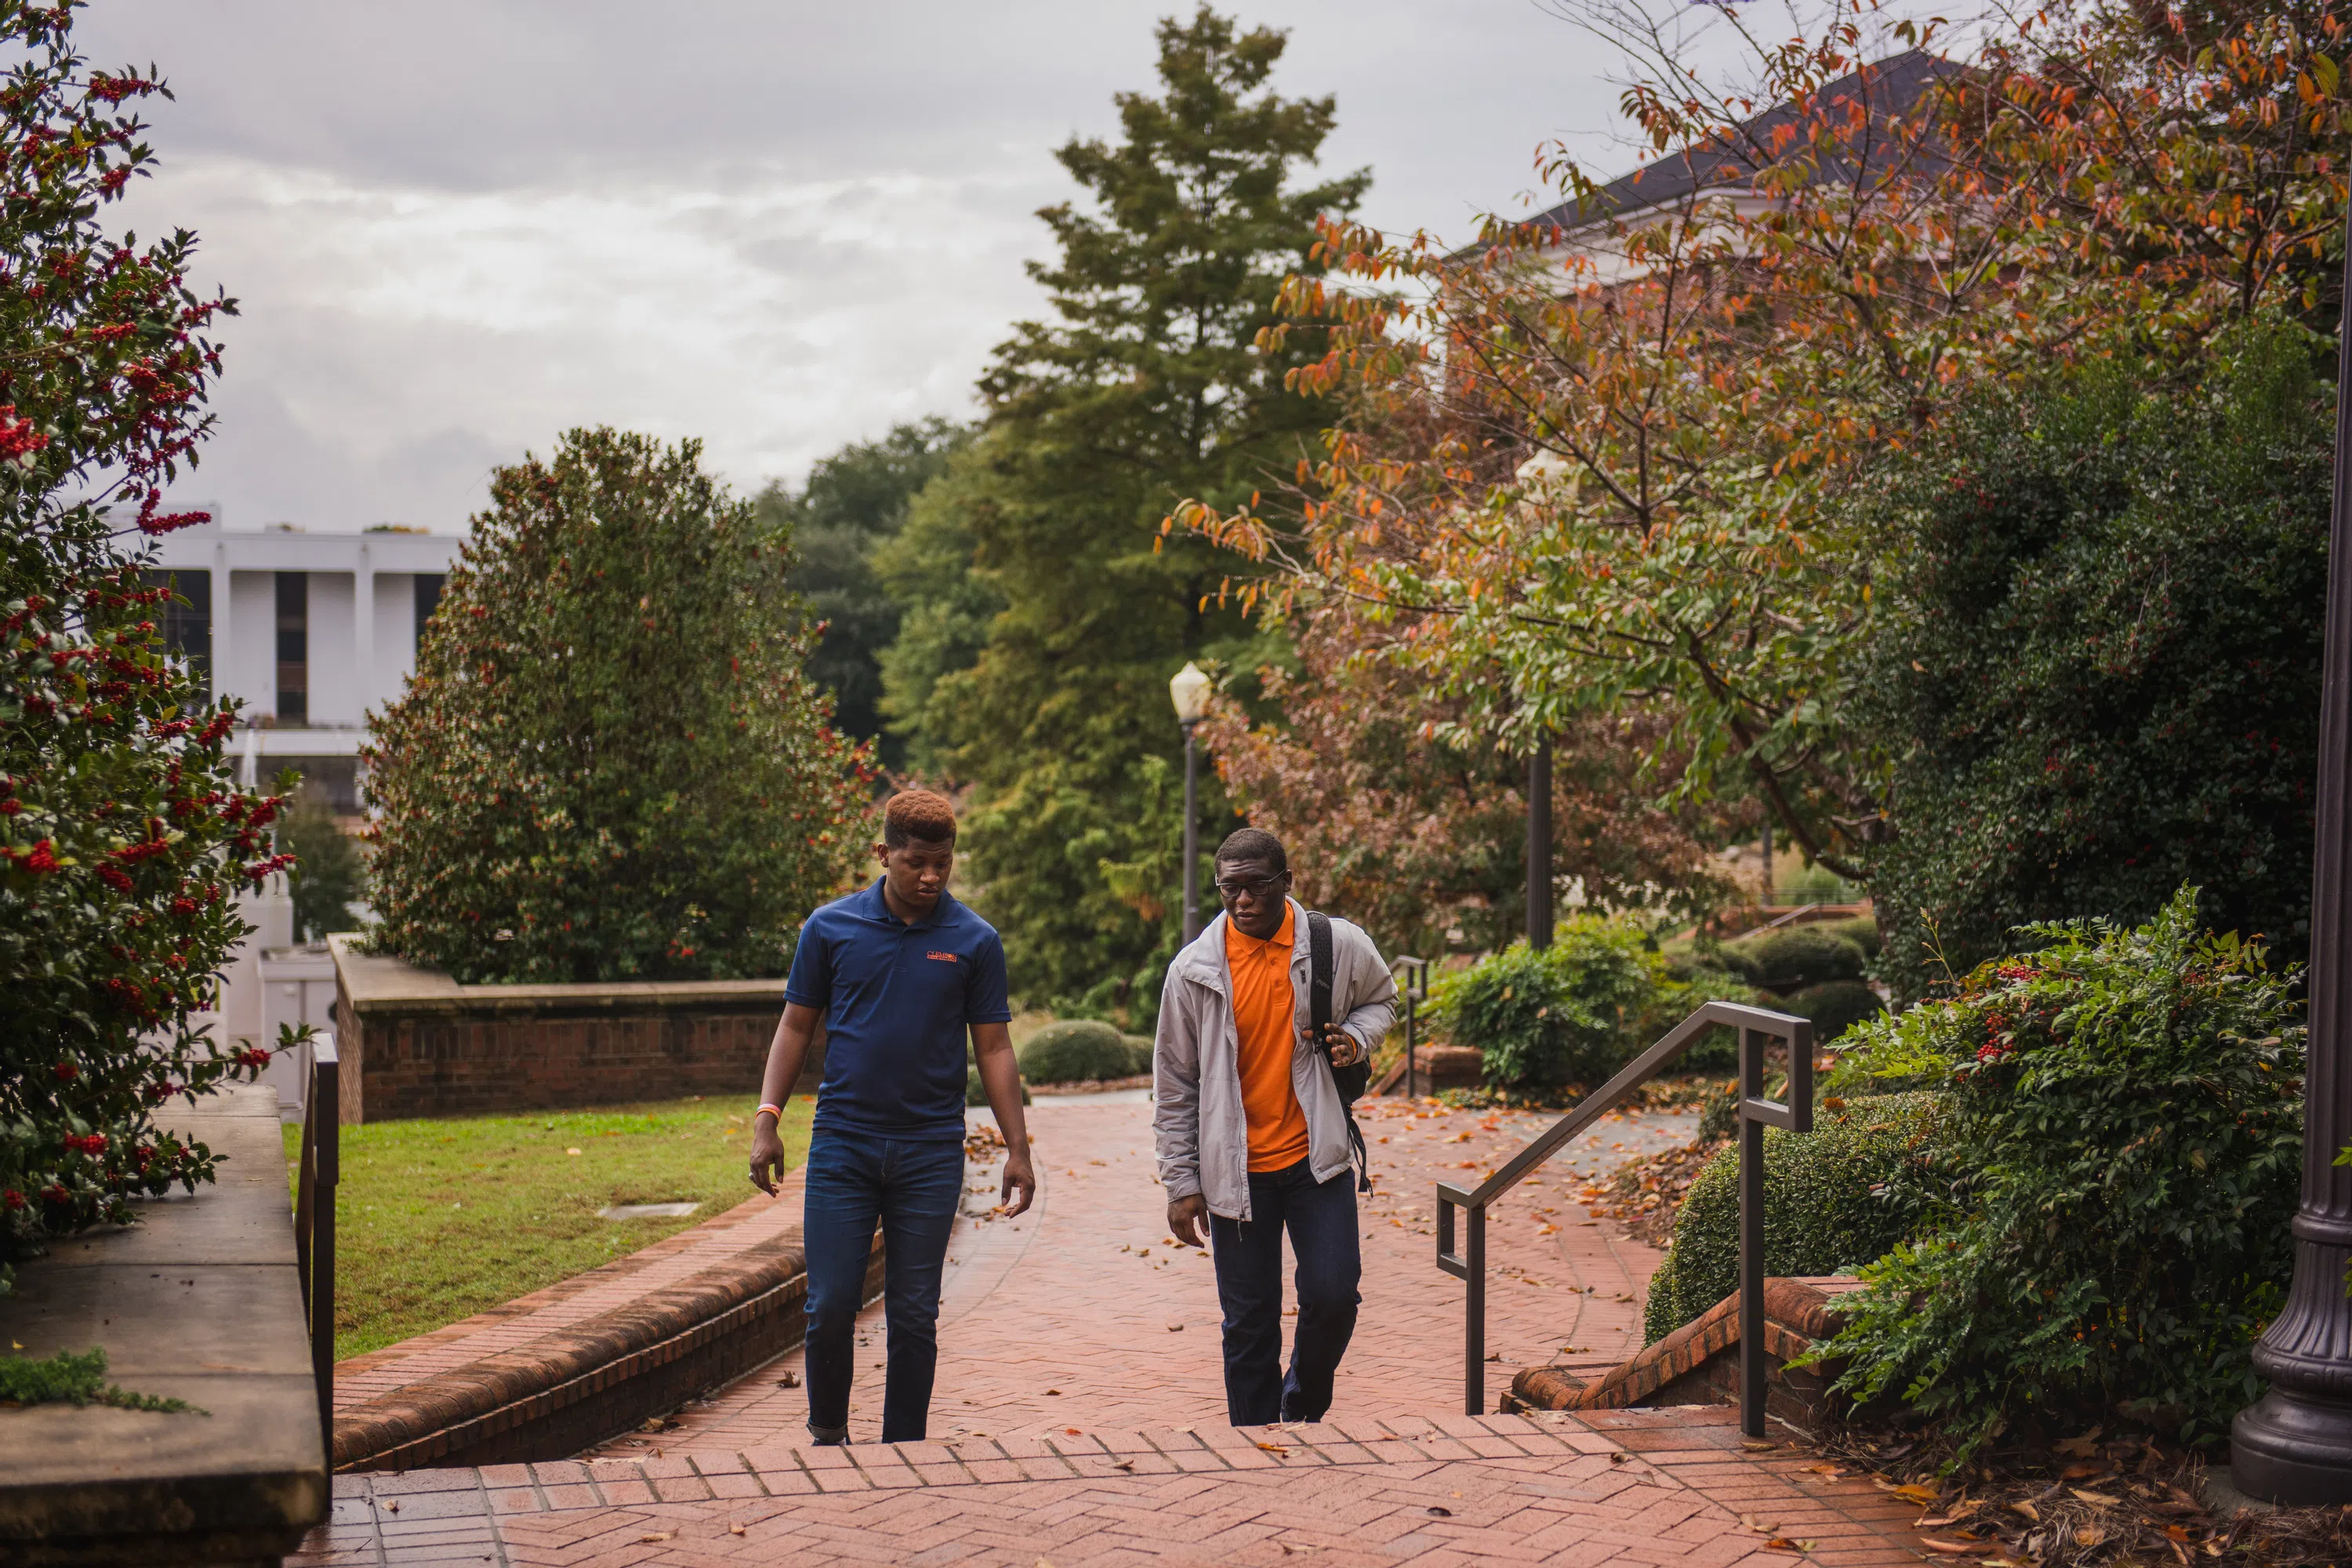 Two students walk together in the Carillon Garden.